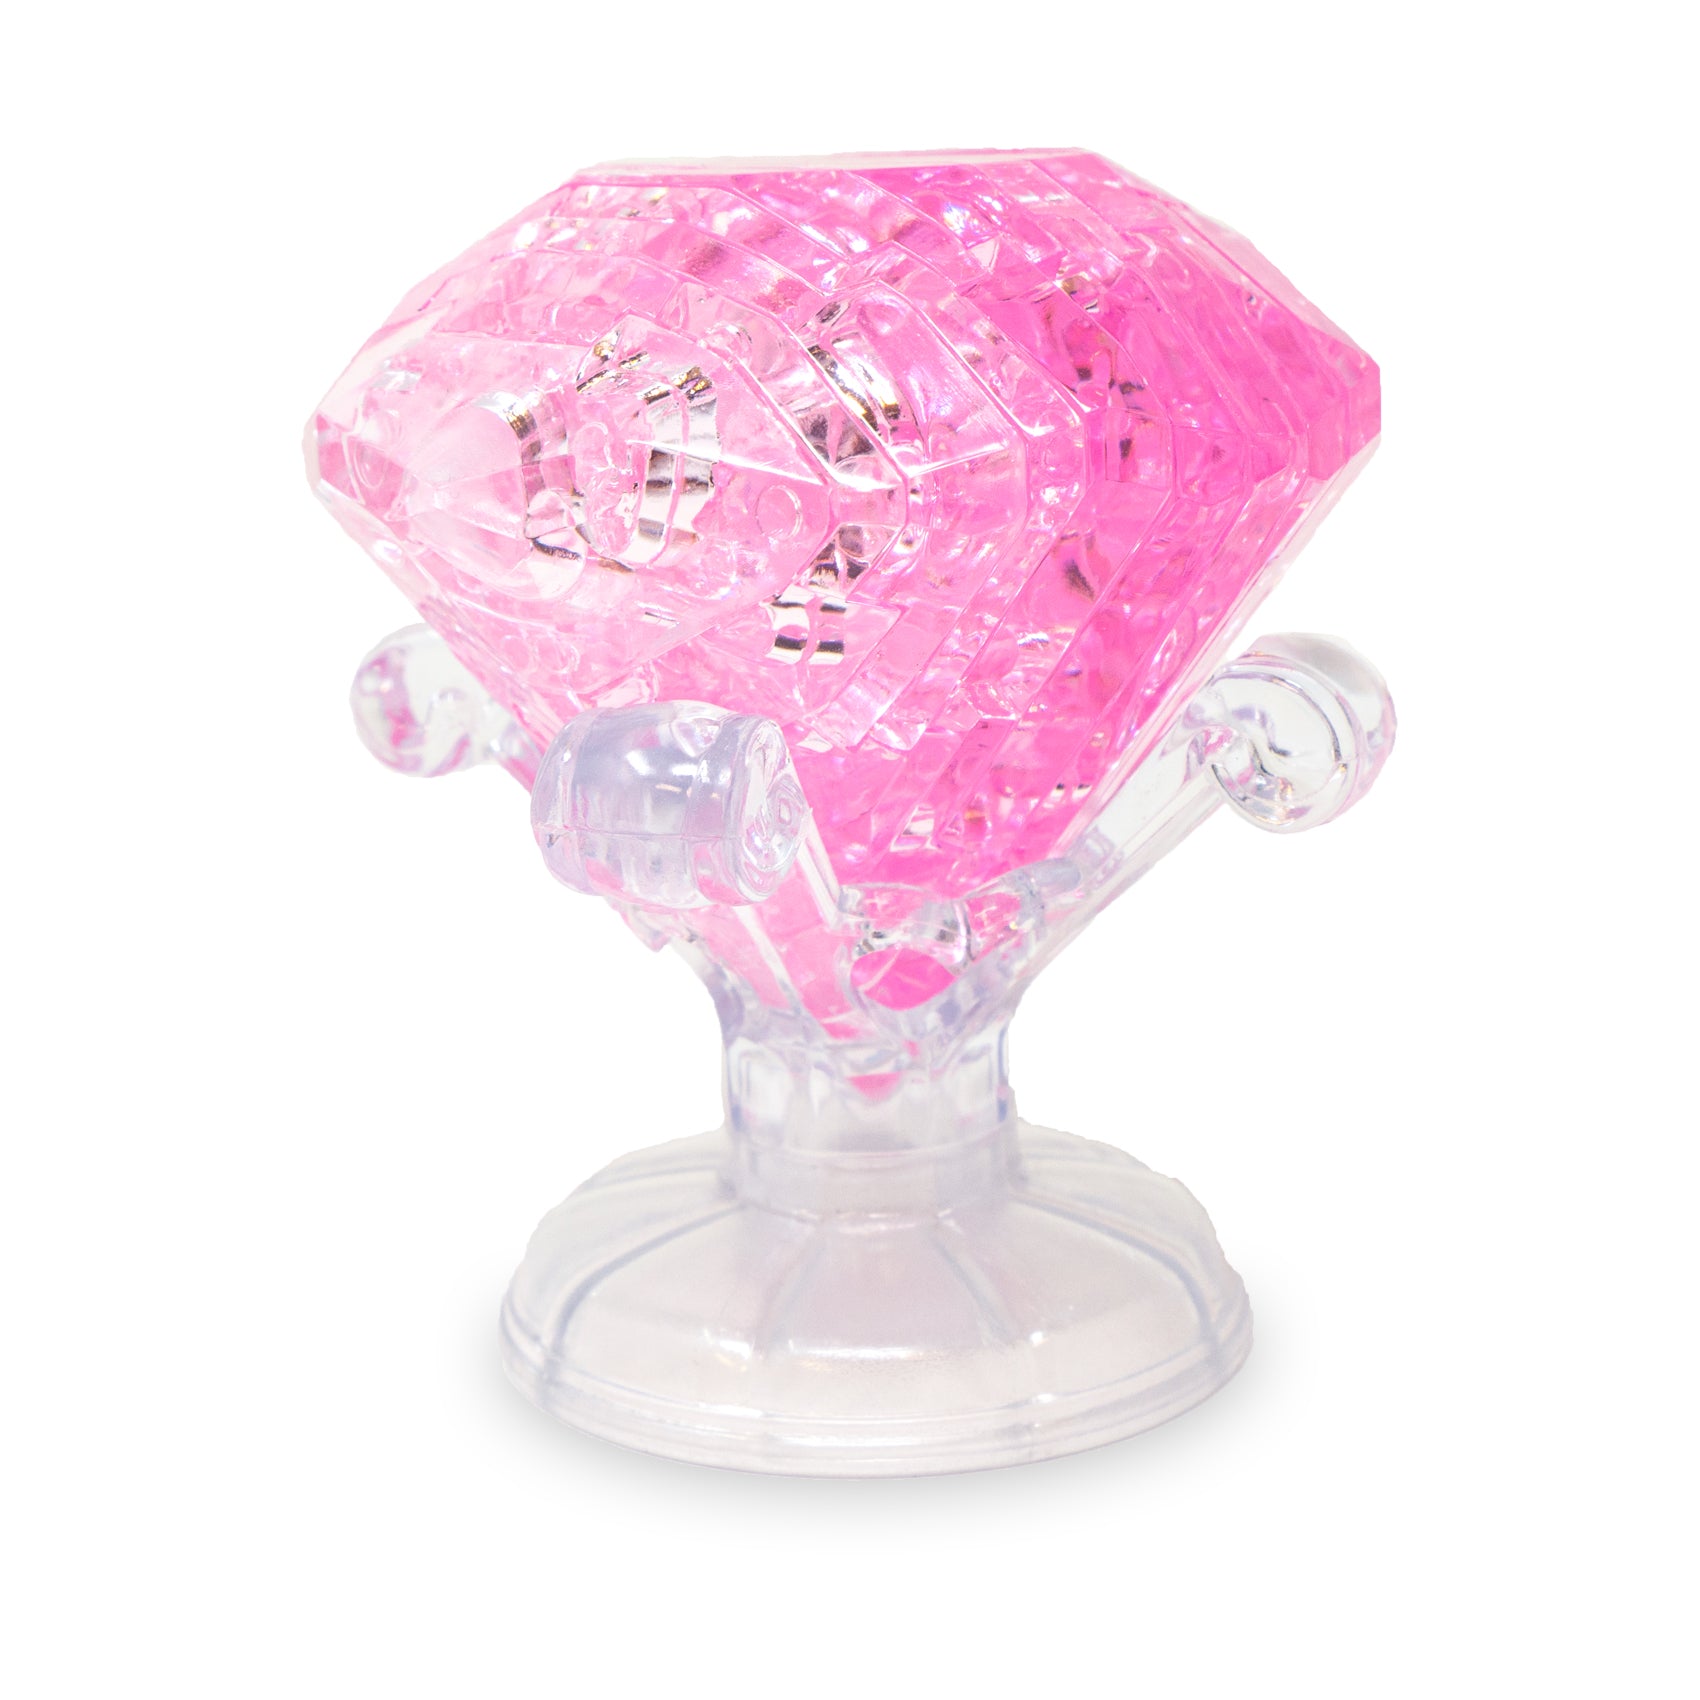 New - AreYouGame.com 3D Crystal Puzzle - Diamond: 43 Pcs - Ages 12